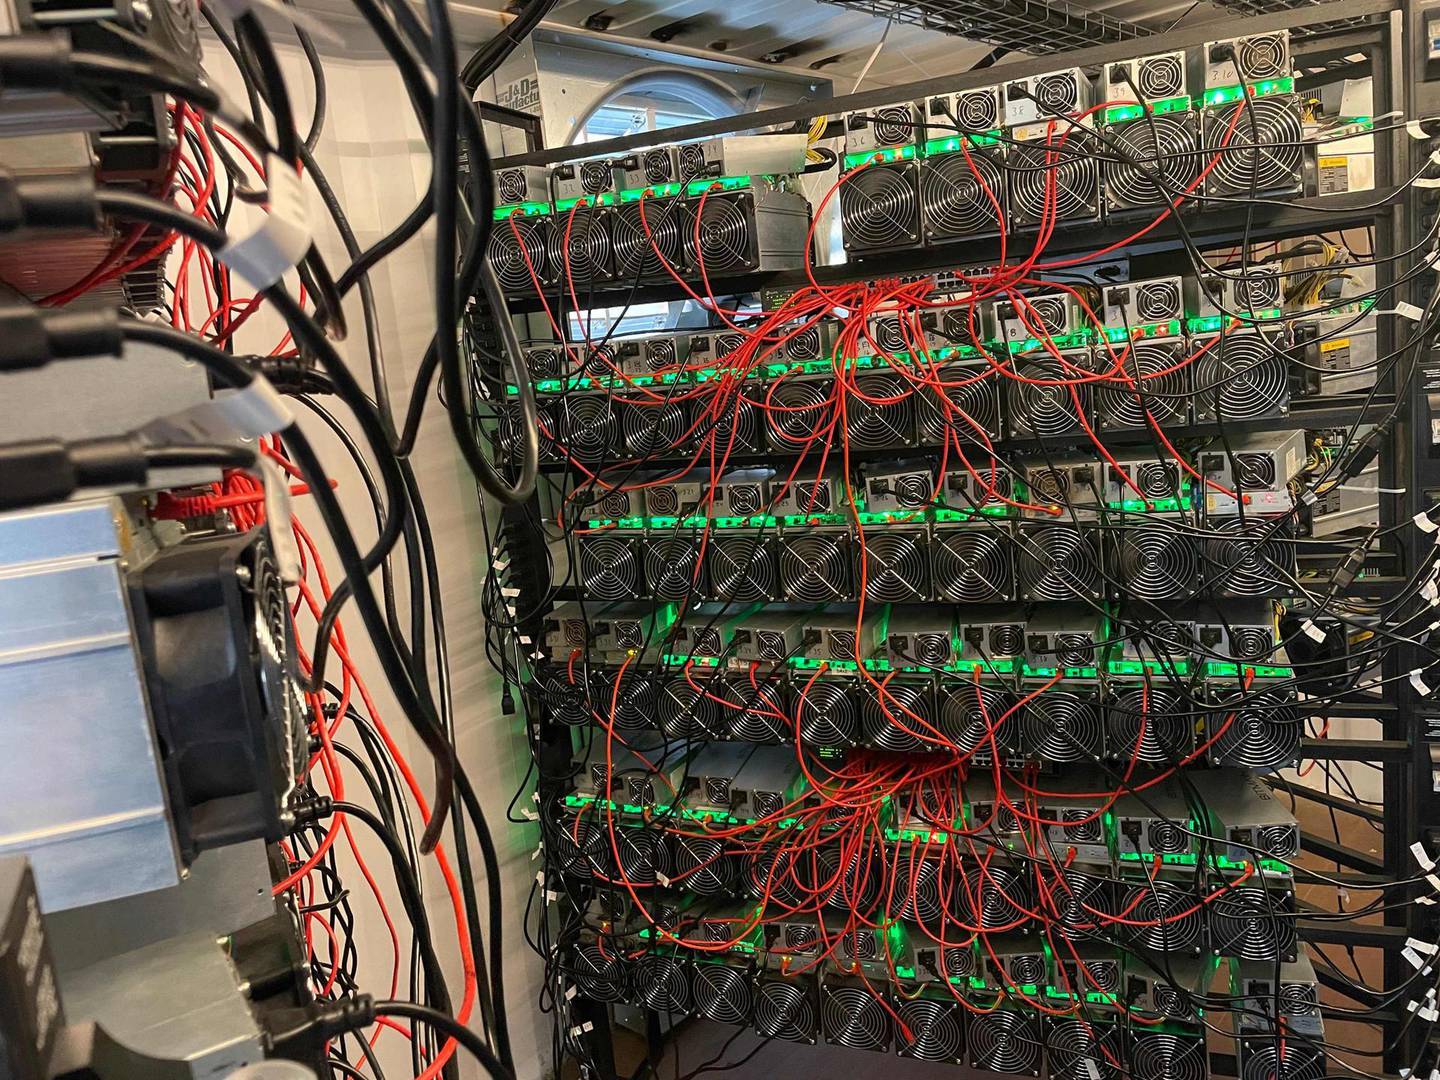 In this photo taken by Matt Lohstroh on May 6, 2021, a bitcoin mining data center is seen on an oil field in North Texas.

 As the value of bitcoin soars and concerns rise about the energy intensive process needed to obtain it, cryptocurrency entrepreneurs in the United States believe they have found a solution in flared natural gas. Profitably creating, or mining, bitcoin and other cryptocurrencies requires masses of computers dedicated to guessing lengthy hexidecimal numbers -- an endeavor that globally consumes more electricity than entire nations, but for which these start-ups say the hydrocarbon-burning torches placed next to oil wells are perfect.
 - RESTRICTED TO EDITORIAL USE - MANDATORY CREDIT "AFP PHOTO / Matt Lohstroh/ HO" - NO MARKETING - NO ADVERTISING CAMPAIGNS - DISTRIBUTED AS A SERVICE TO CLIENTS
 / AFP / Matt Lohstroh / Handout / RESTRICTED TO EDITORIAL USE - MANDATORY CREDIT "AFP PHOTO / Matt Lohstroh/ HO" - NO MARKETING - NO ADVERTISING CAMPAIGNS - DISTRIBUTED AS A SERVICE TO CLIENTS
